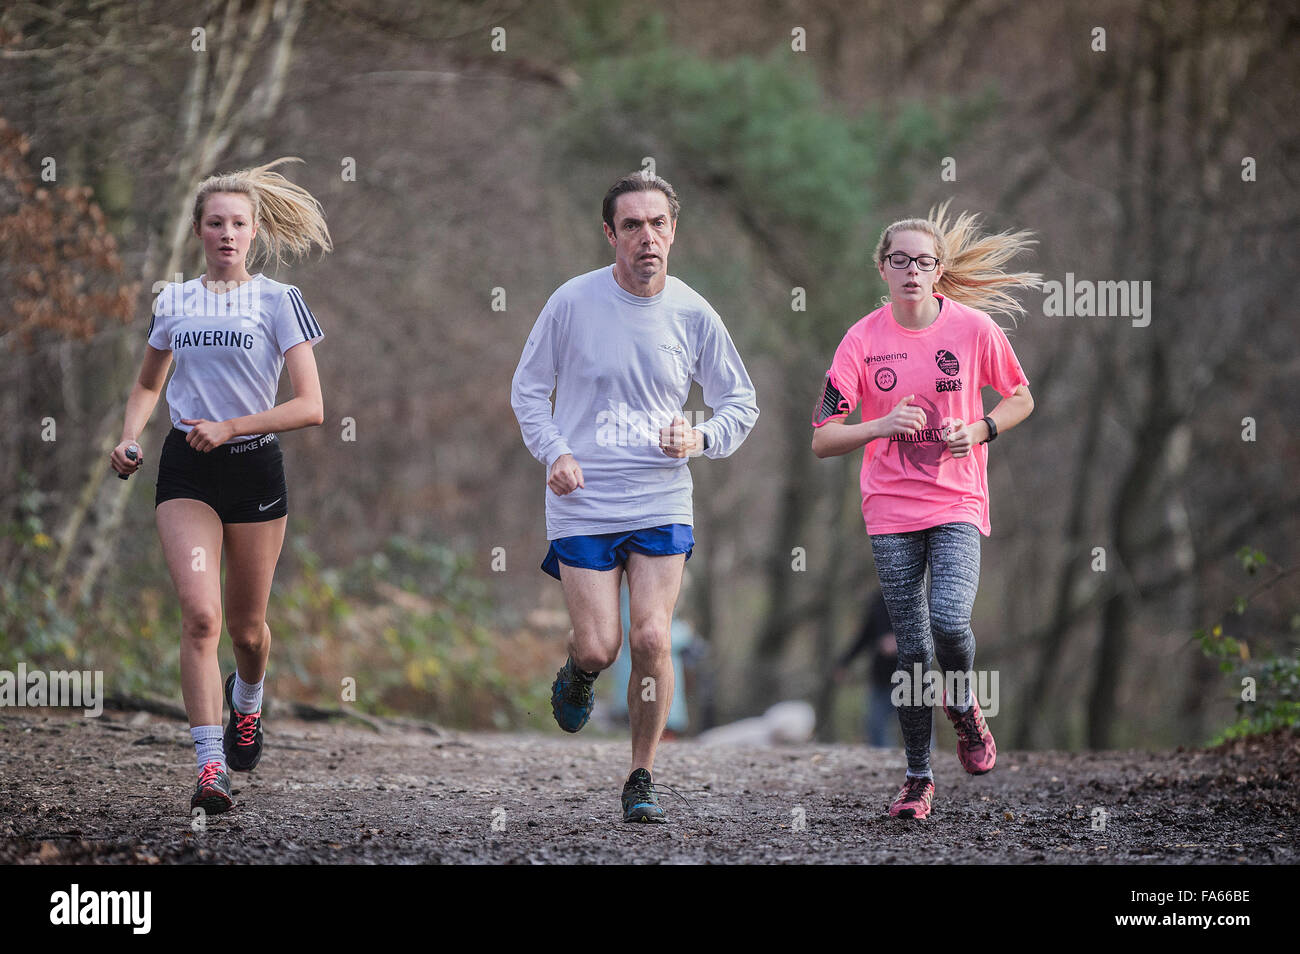 Runners exercising in Thorndon Park woodland in Essex, England, United Kingdom. Stock Photo